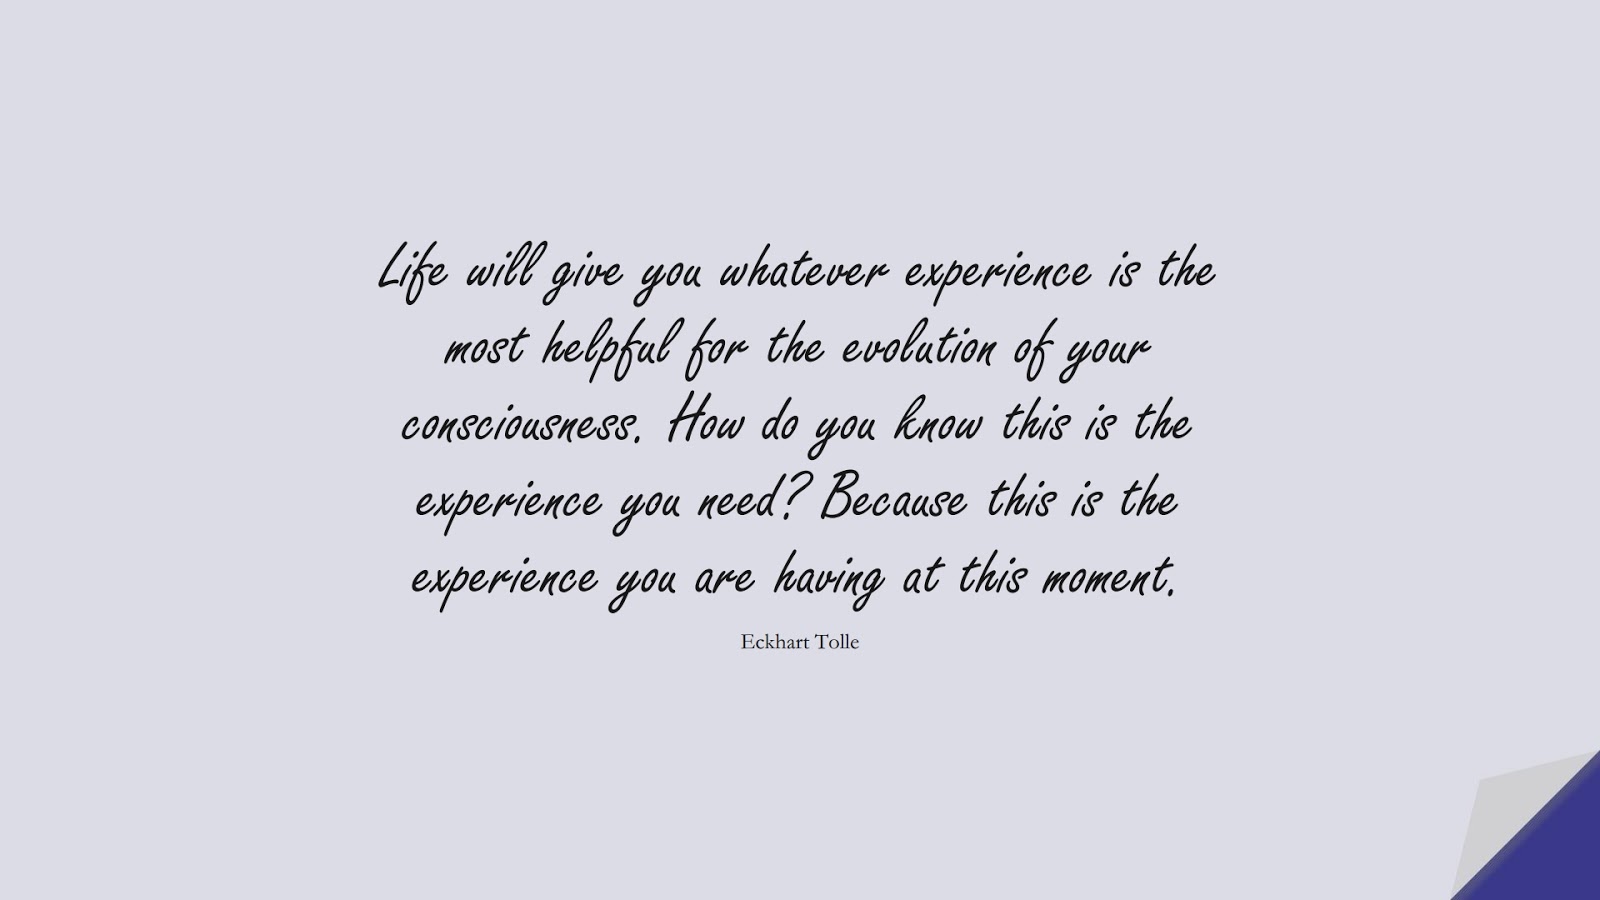 Life will give you whatever experience is the most helpful for the evolution of your consciousness. How do you know this is the experience you need? Because this is the experience you are having at this moment. (Eckhart Tolle);  #DepressionQuotes